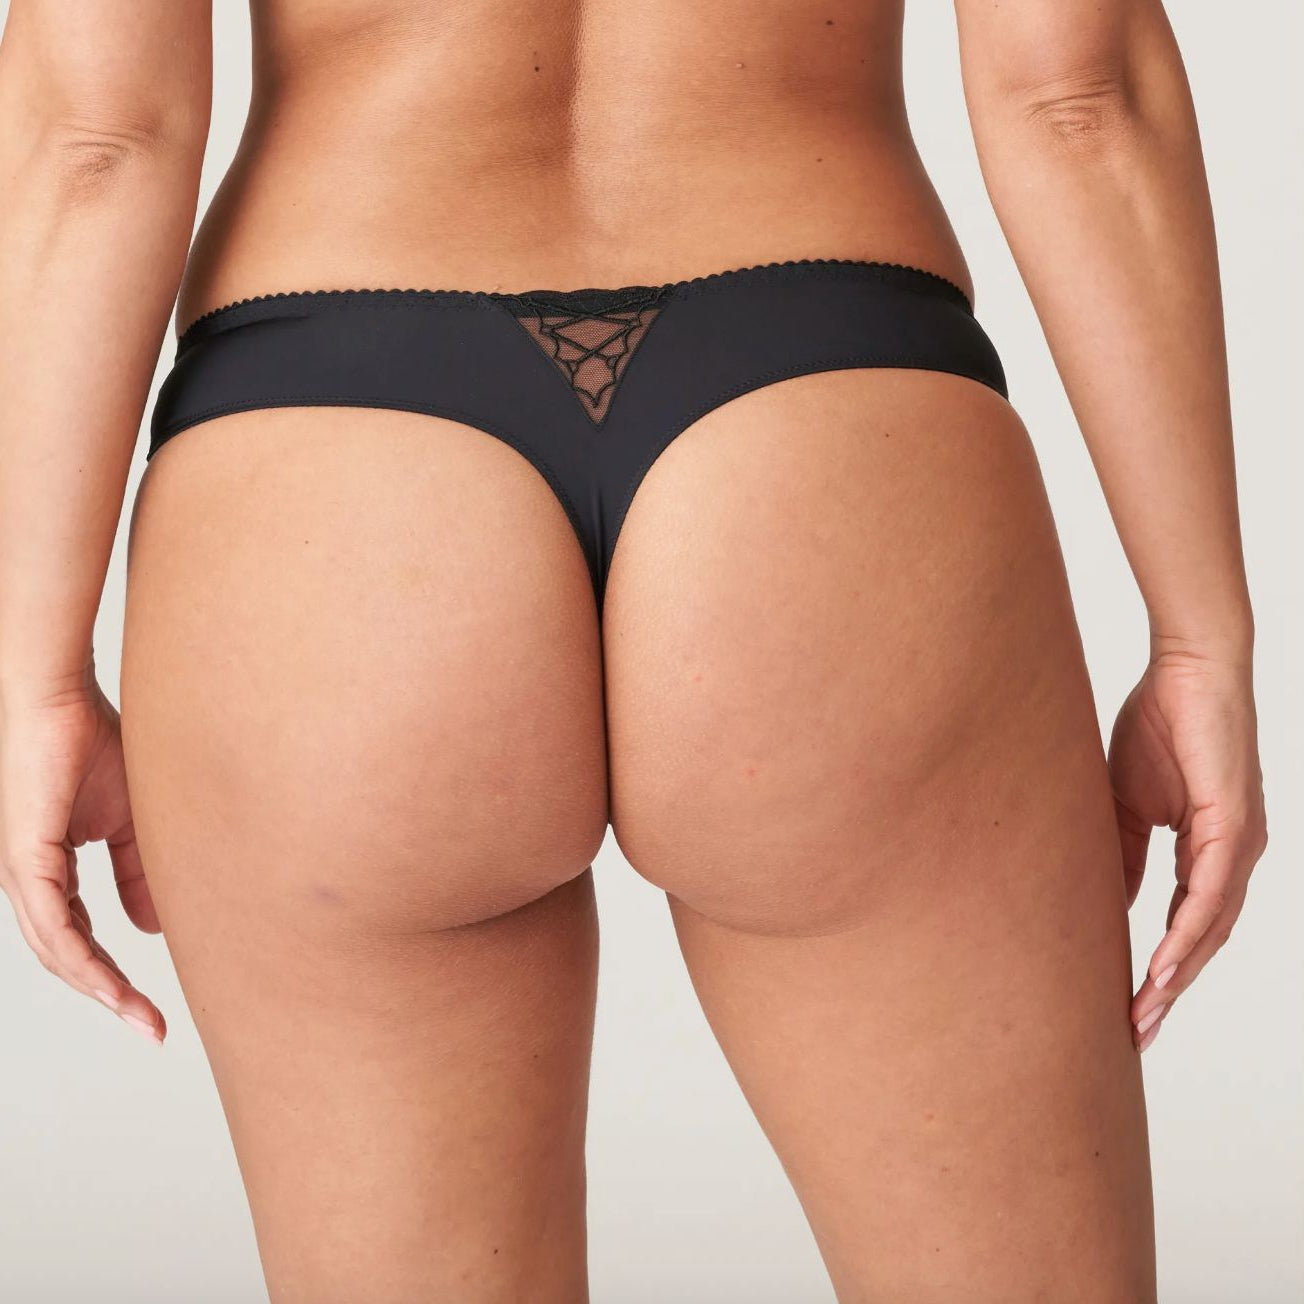 Prima Donna Livonia Thong 0663430-Panties-Prima Donna-Black-Small-Anna Bella Fine Lingerie, Reveal Your Most Gorgeous Self!